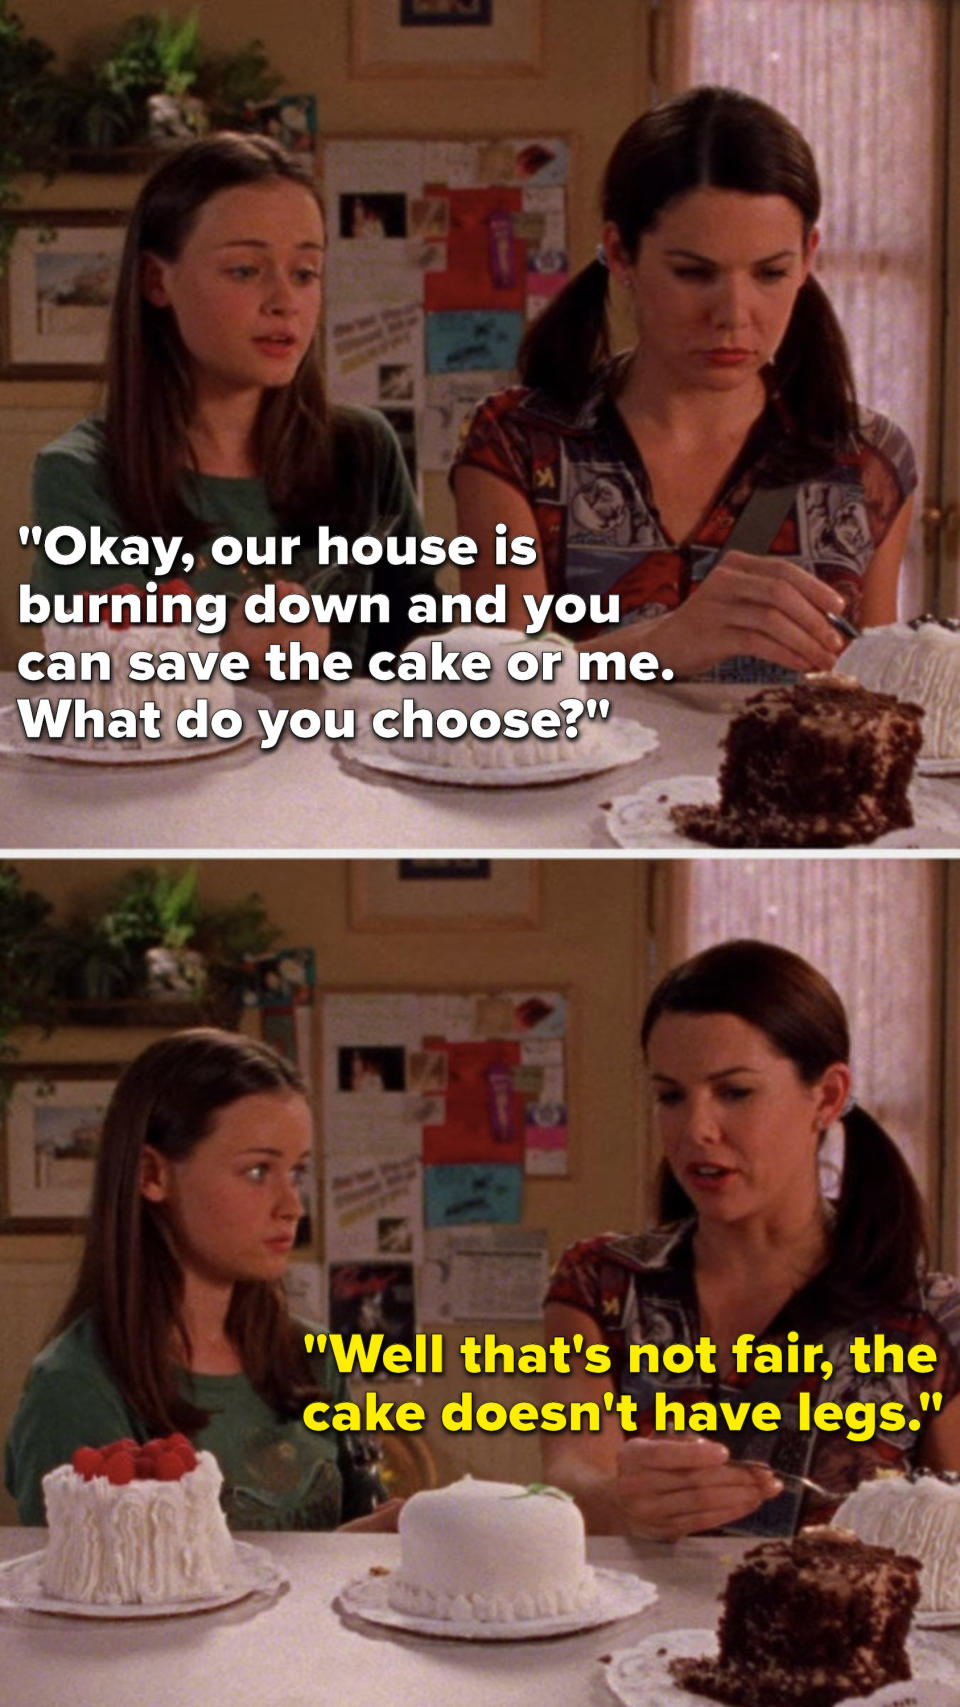 On Gilmore Girls, Rory says, Okay, our house is burning down and you can save the cake or me, What do you choose, and Lorelai says, Well that's not fair, the cake doesn't have legs